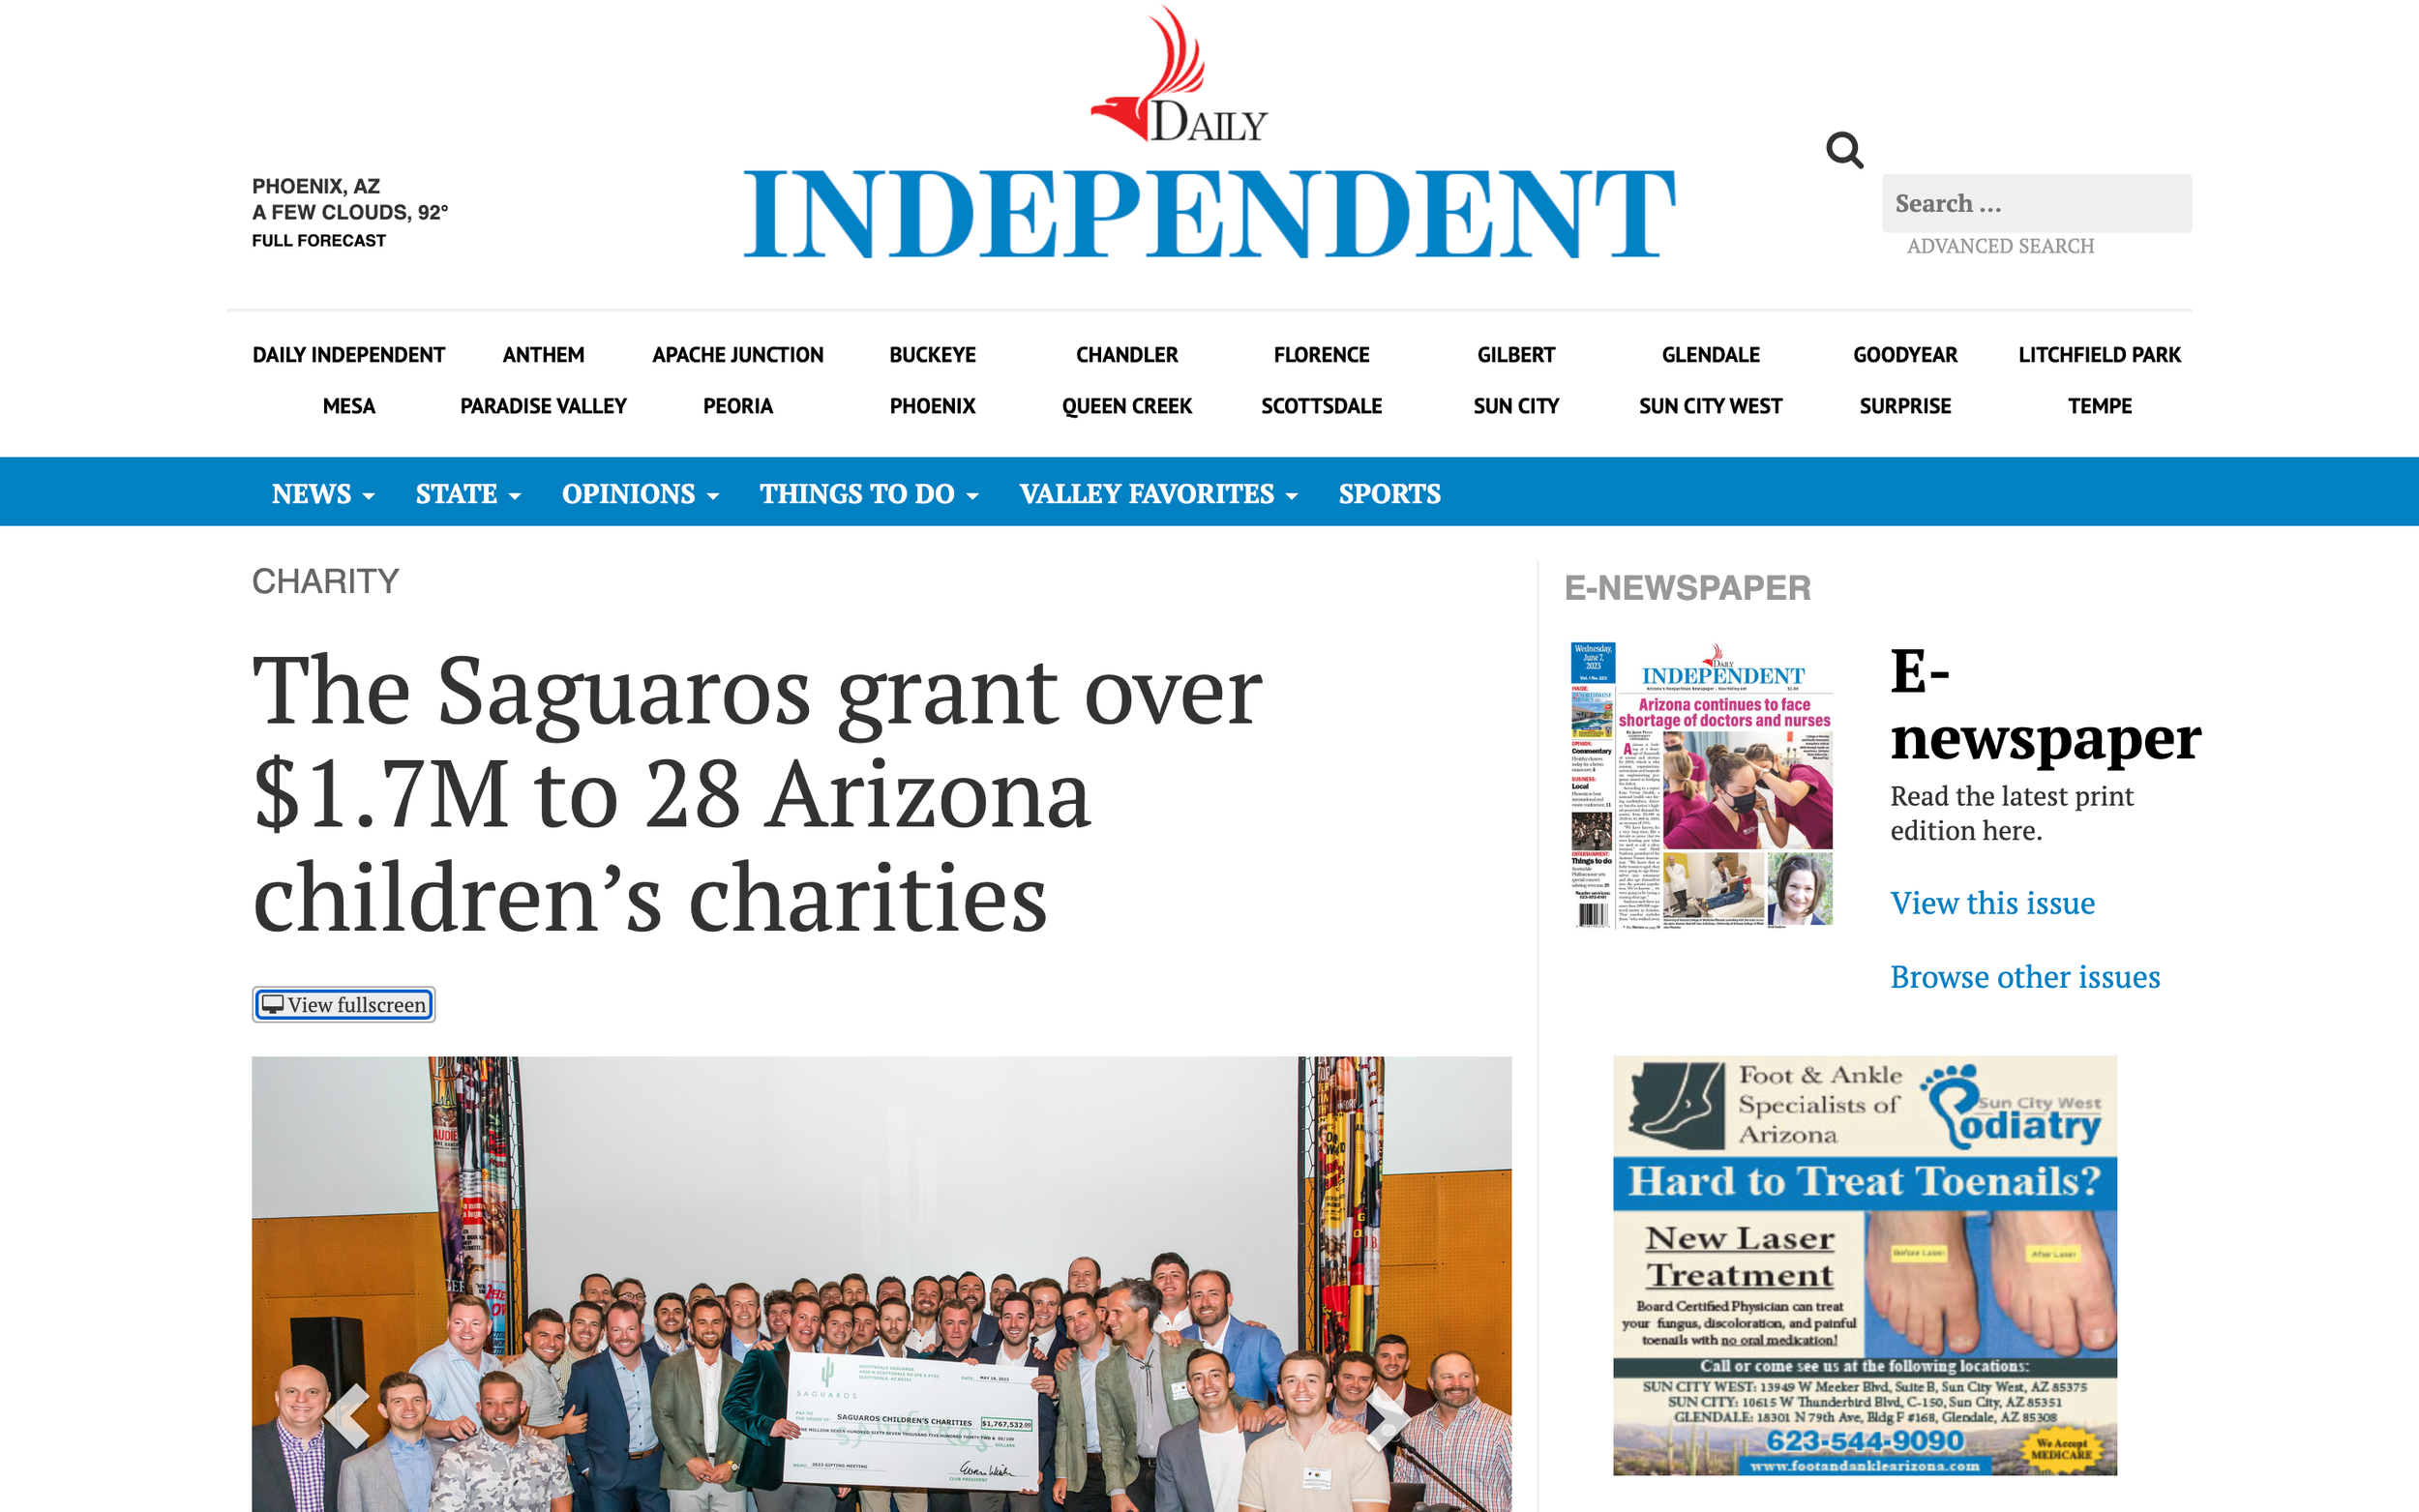 Daily Independent: The Saguaros grant over $1.7M to 28 Arizona children’s charities (Copy)